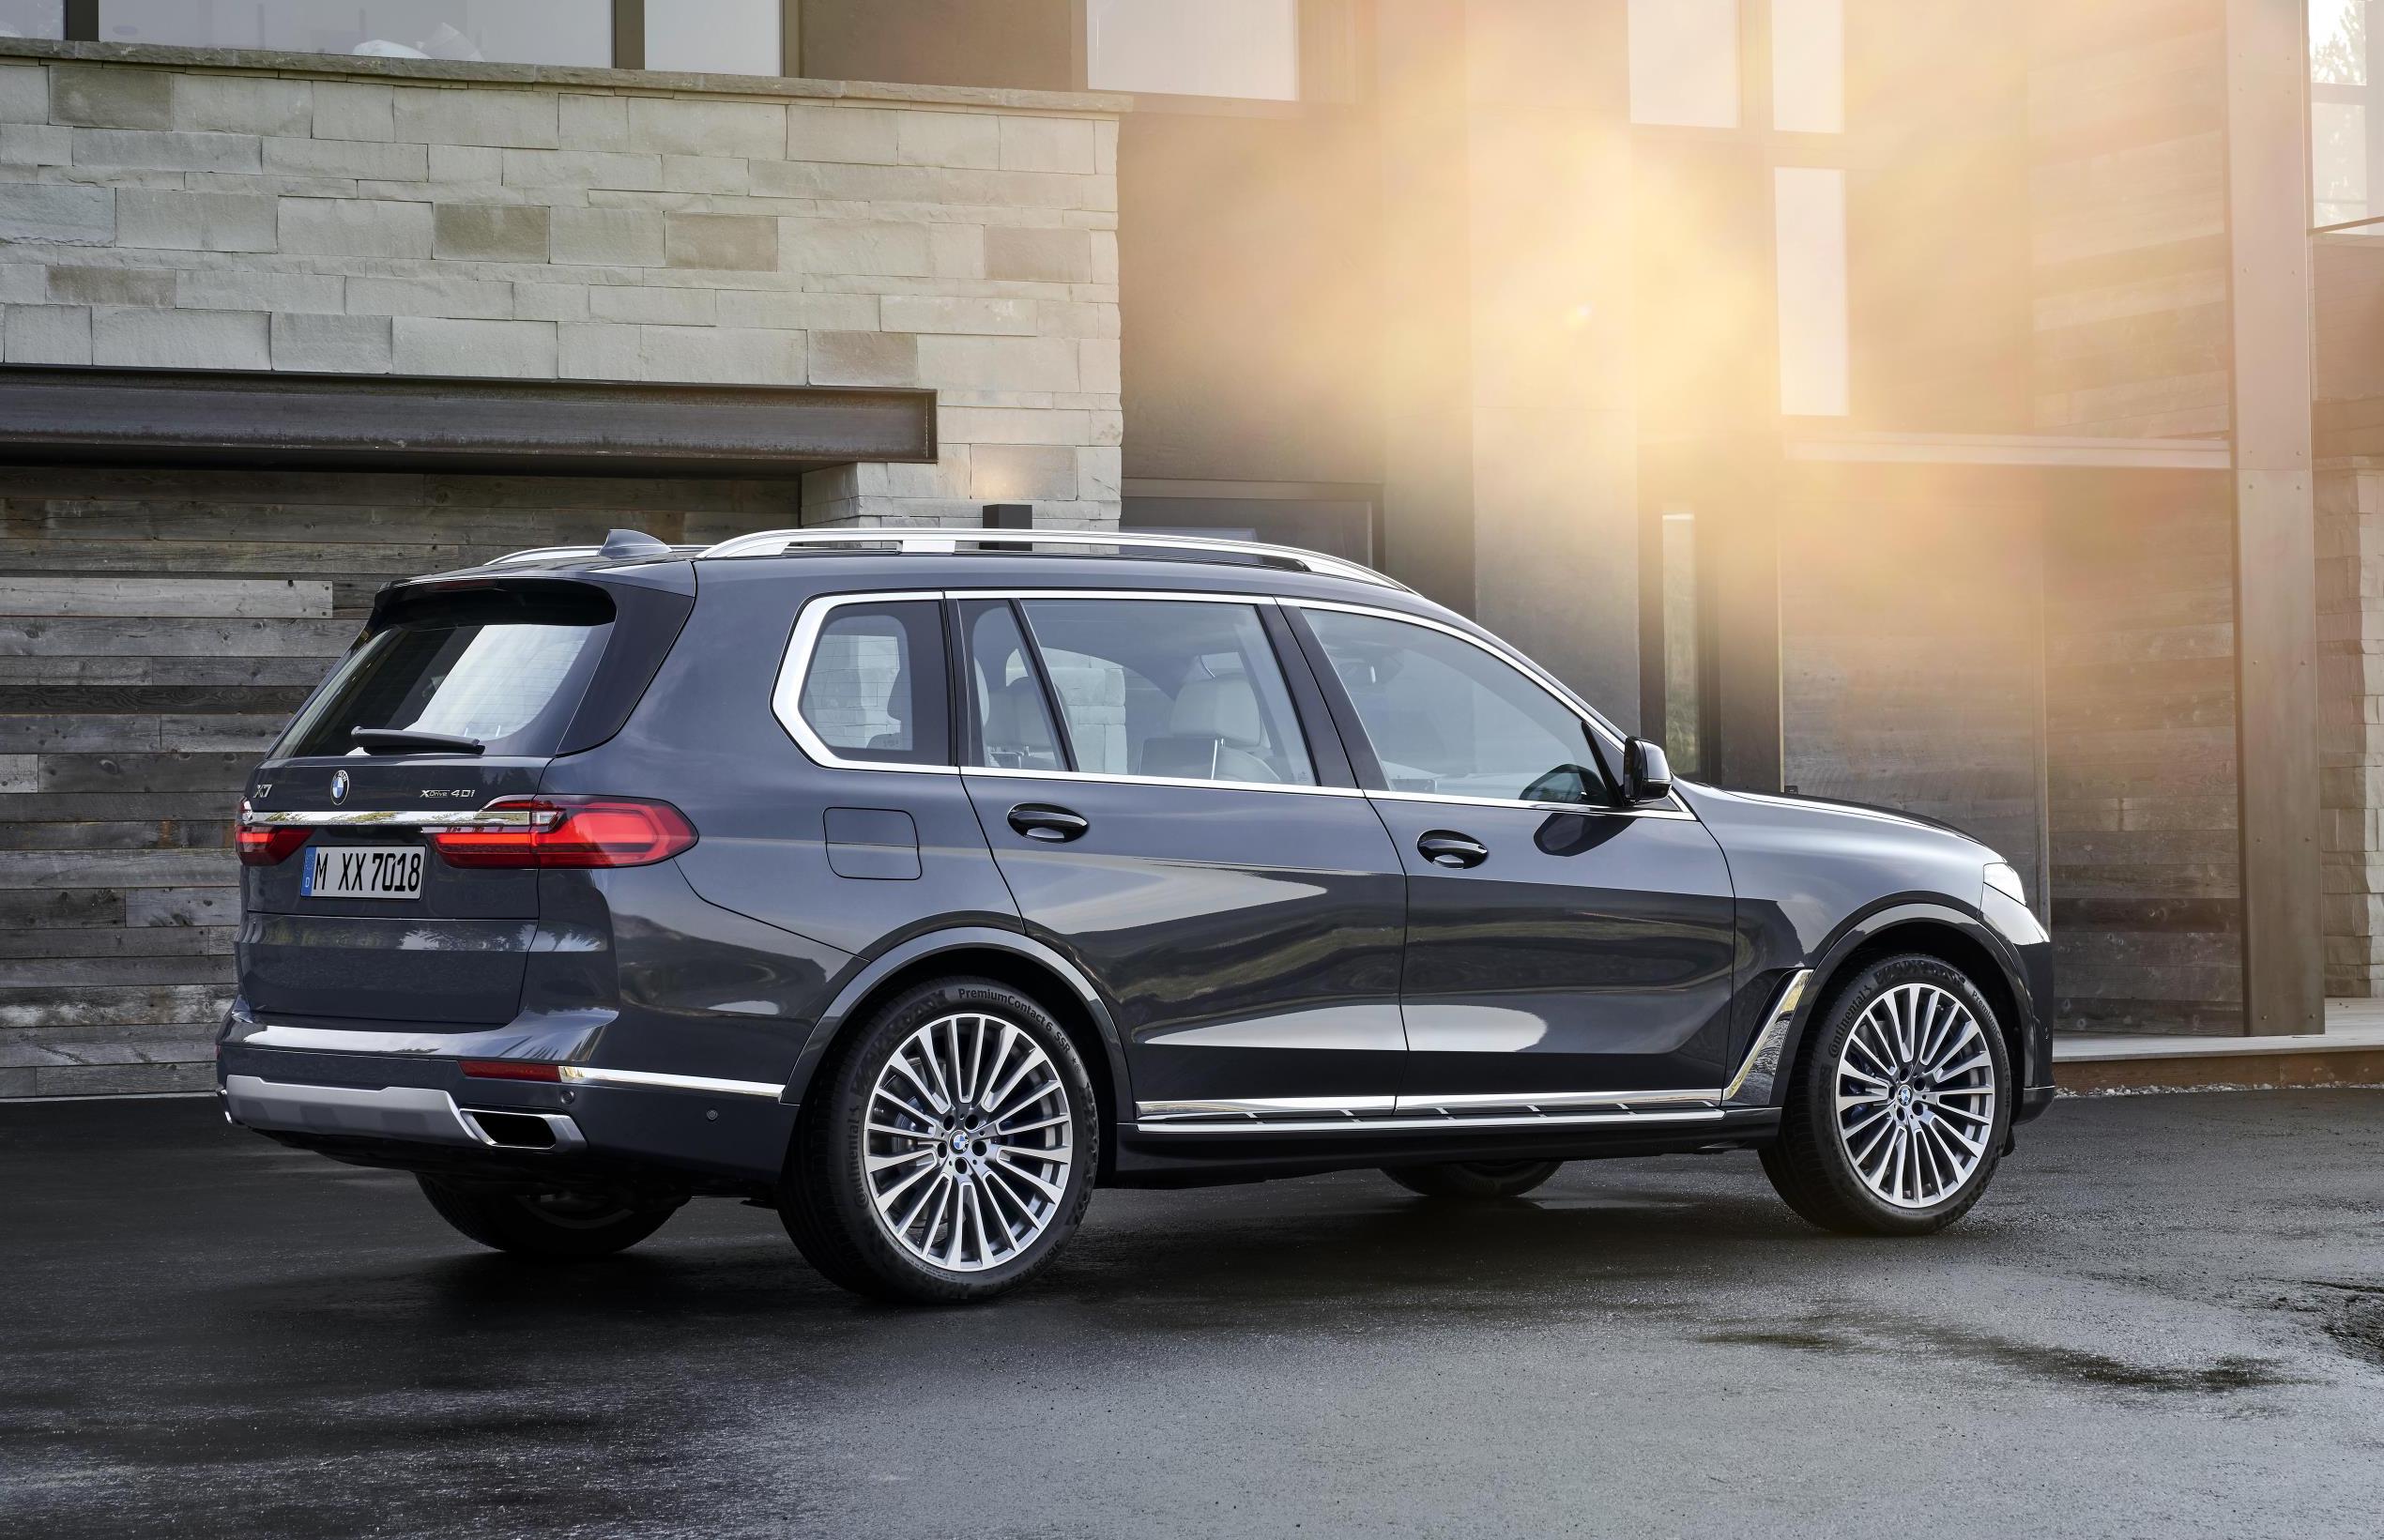 BMW X7 on sale in Australia in May, from $119,900 - PerformanceDrive